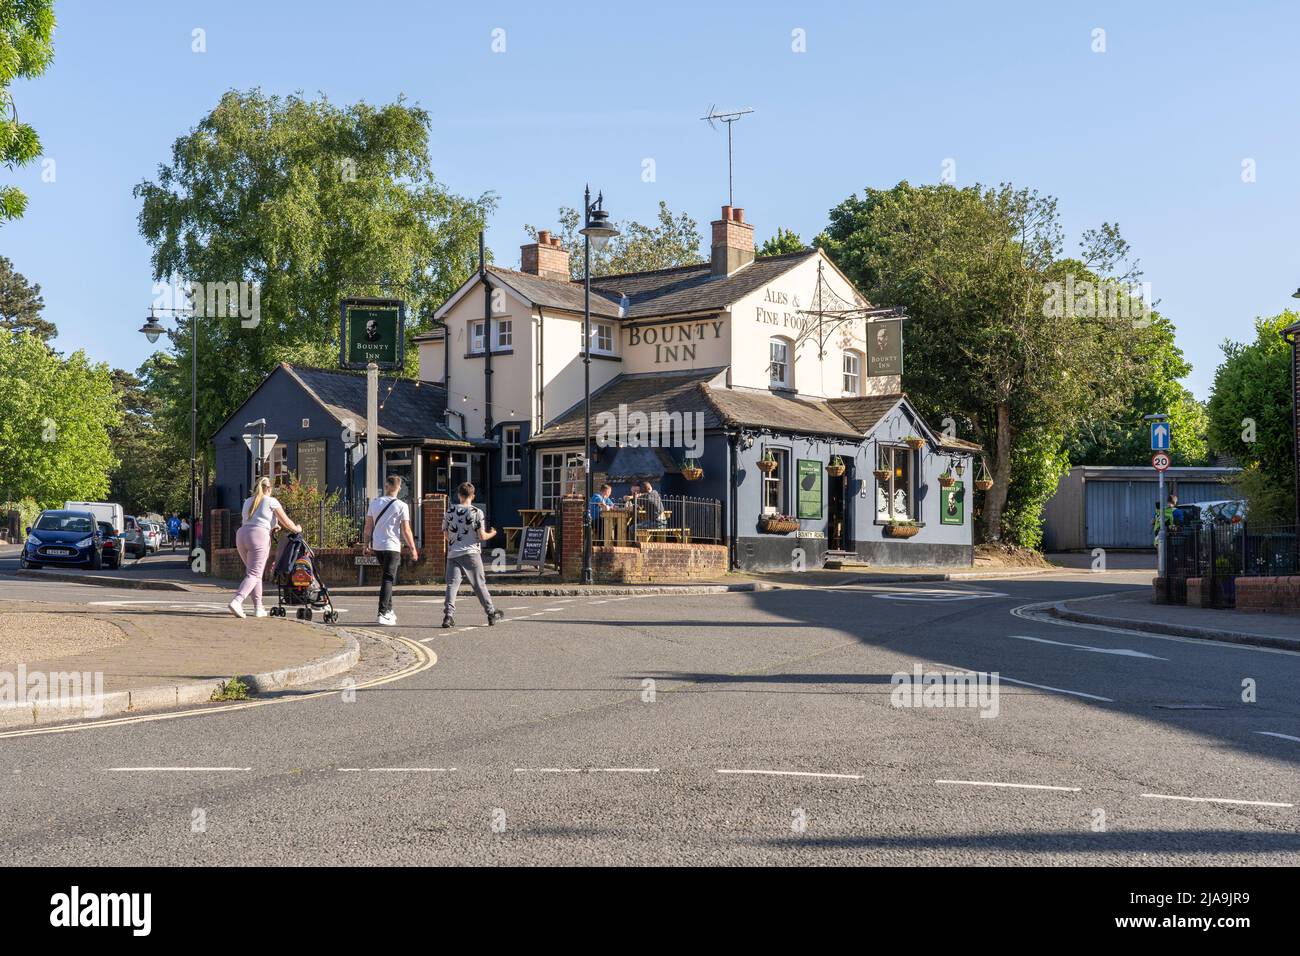 The historic mid 18th century Bounty Inn is a popular pub in Basingstoke town centre. Hampshire, England. Theme - pub and hospitality industry Stock Photo